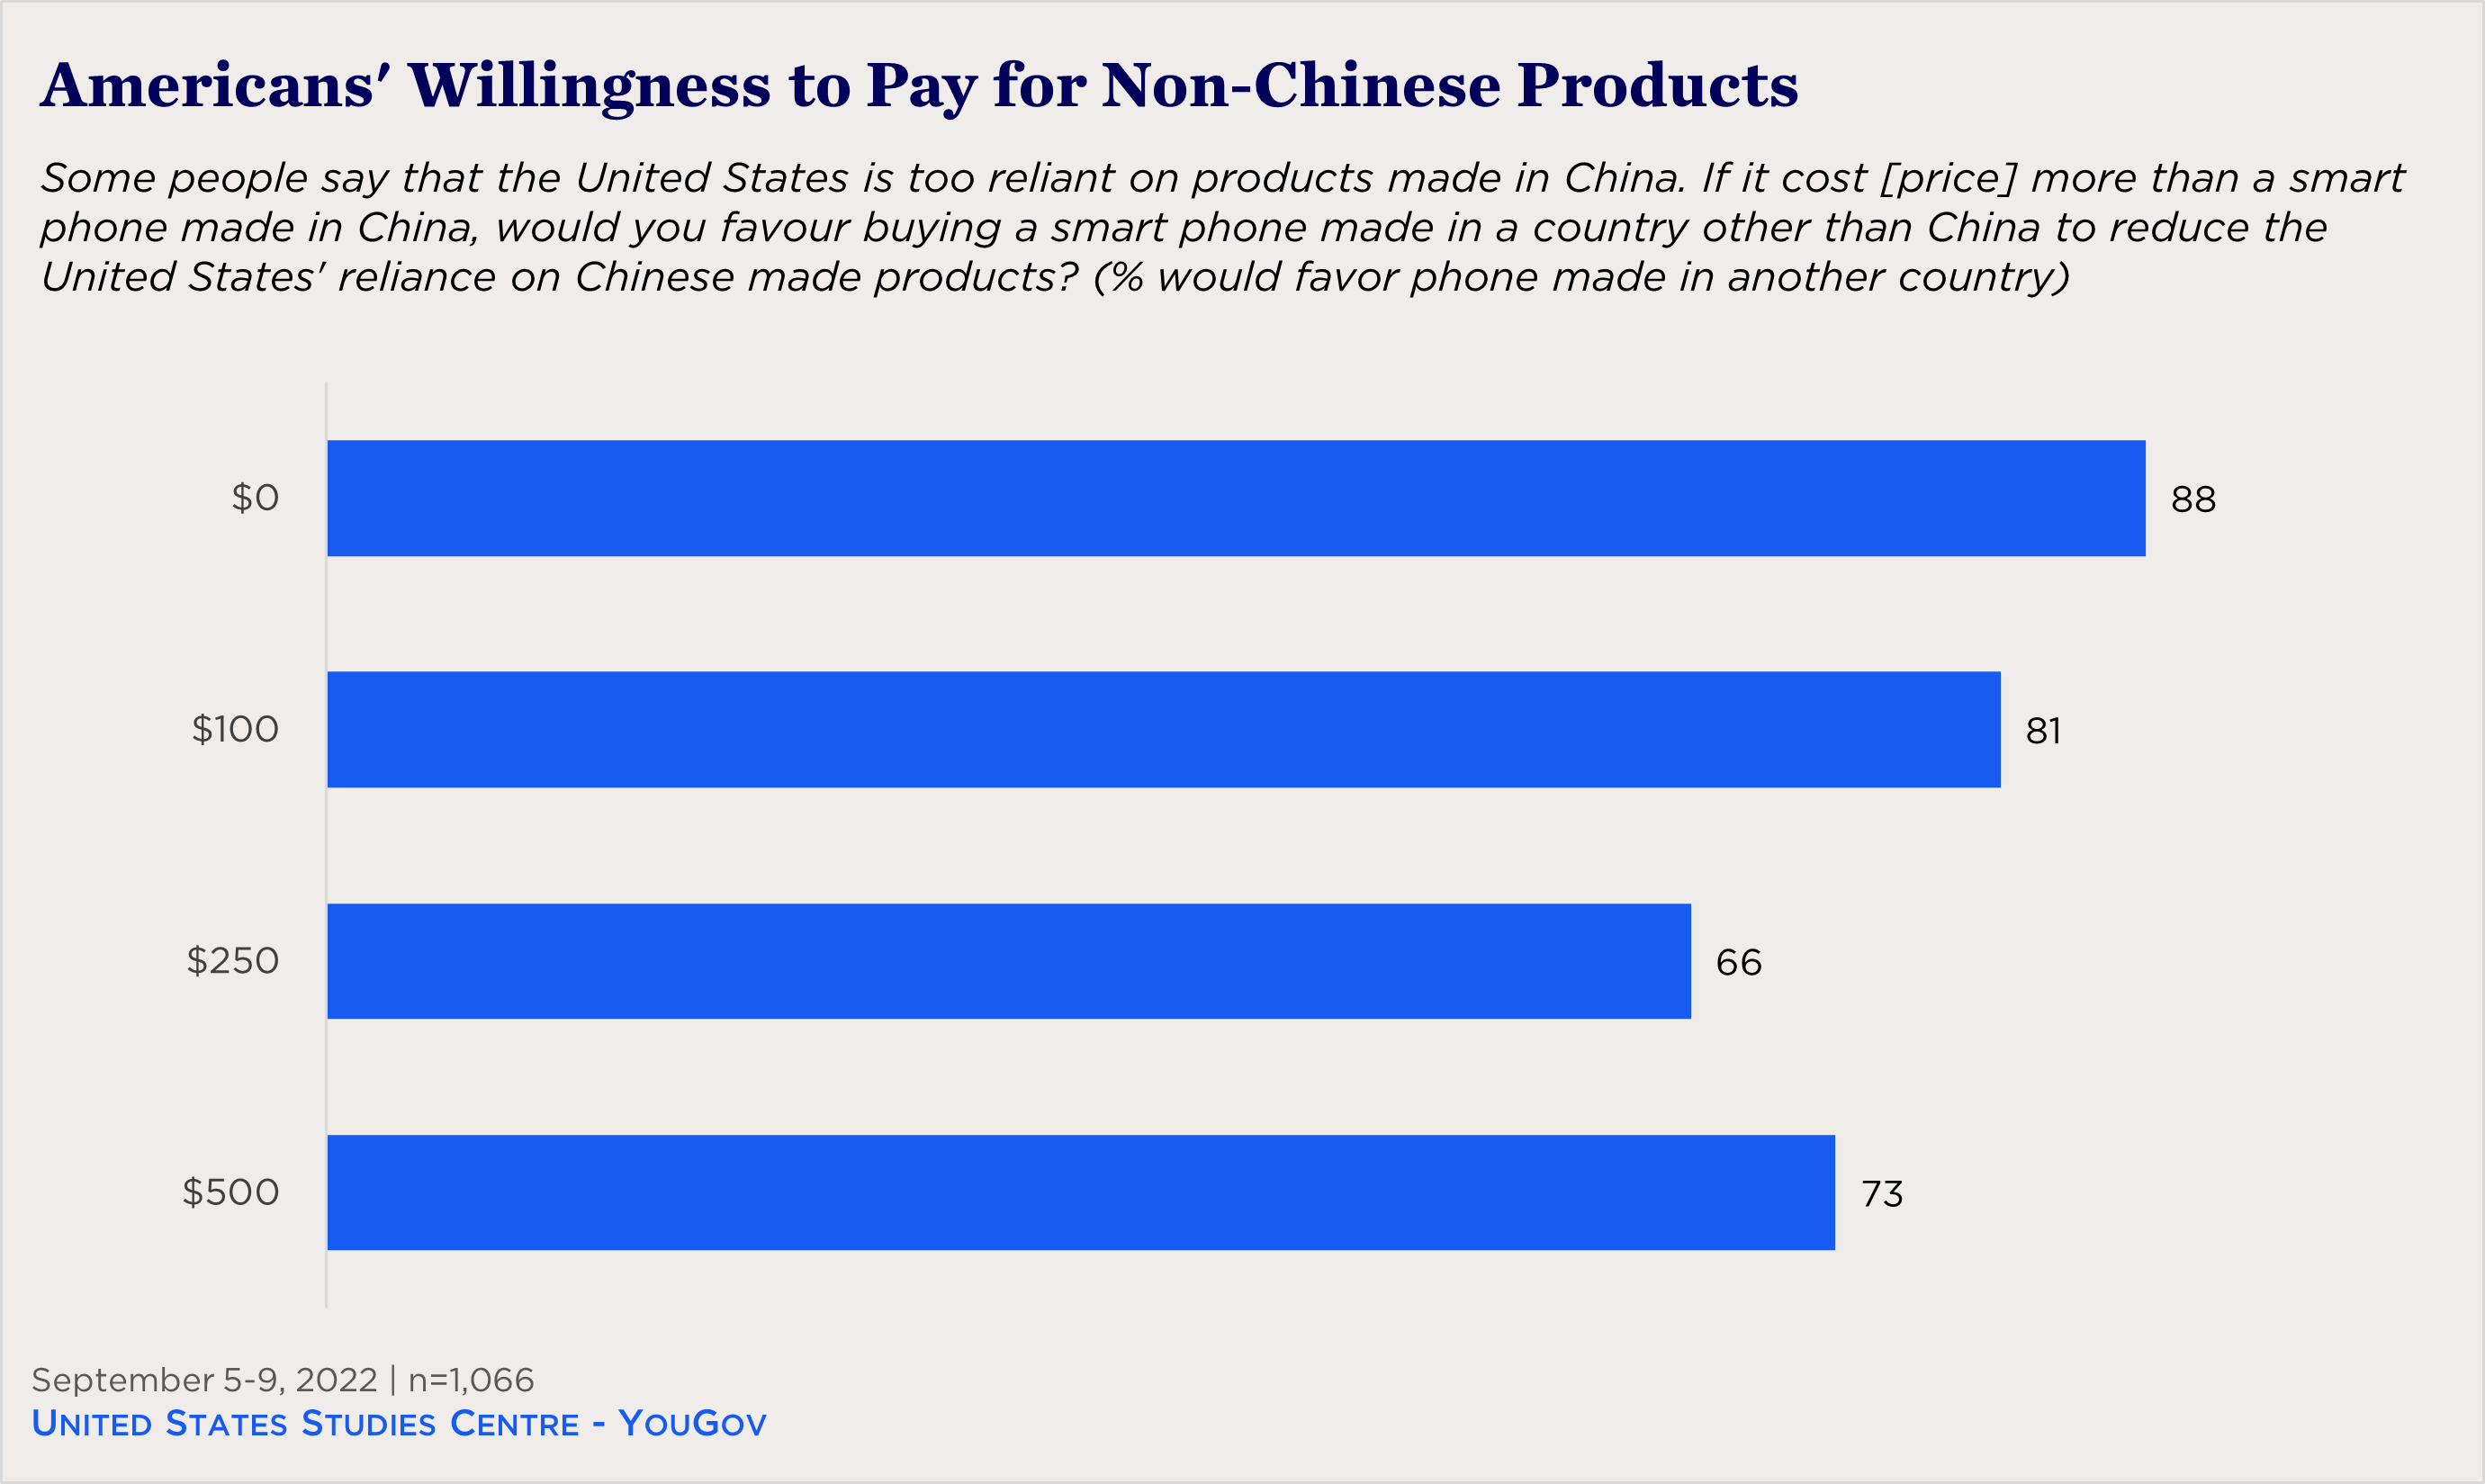 bar chart showing Americans' willingness to pay for non-Chinese products;